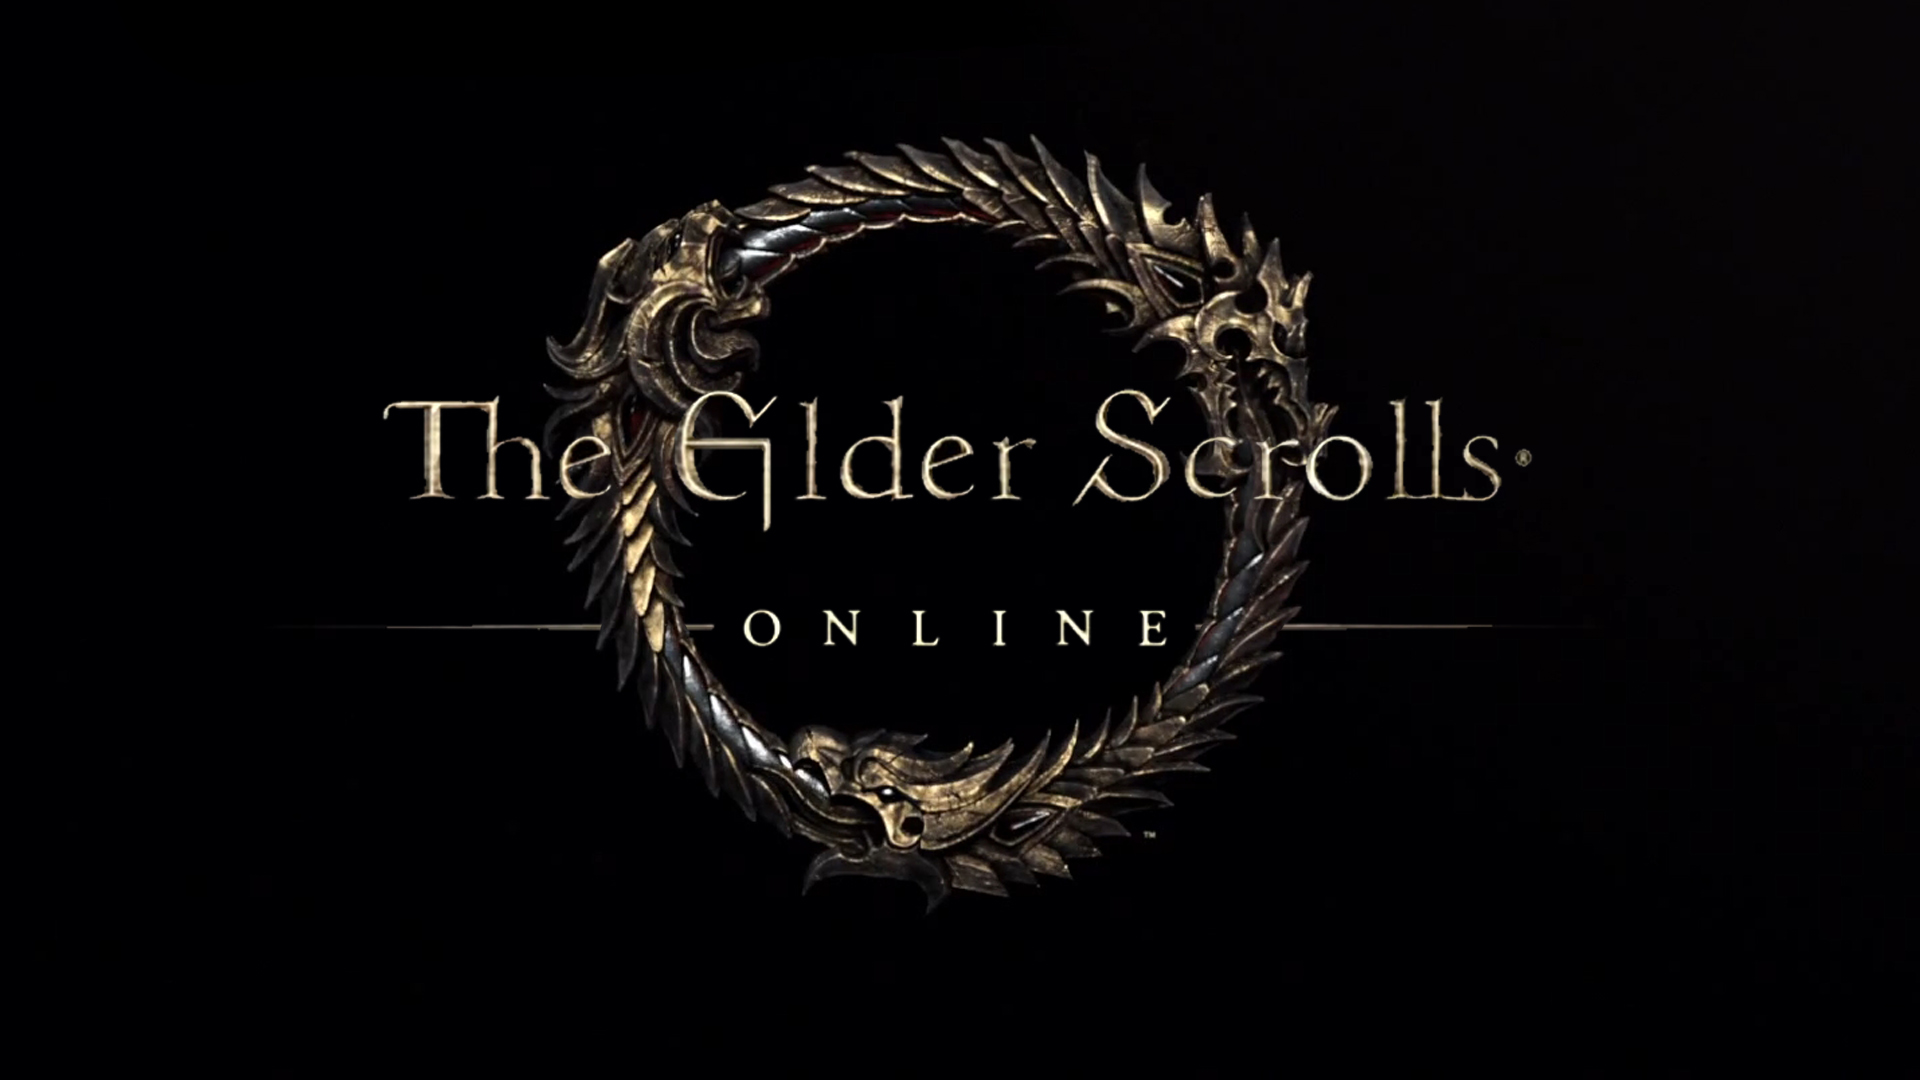 The next DLC for Elder Scrolls Online is Wolfhunter Dungeons and